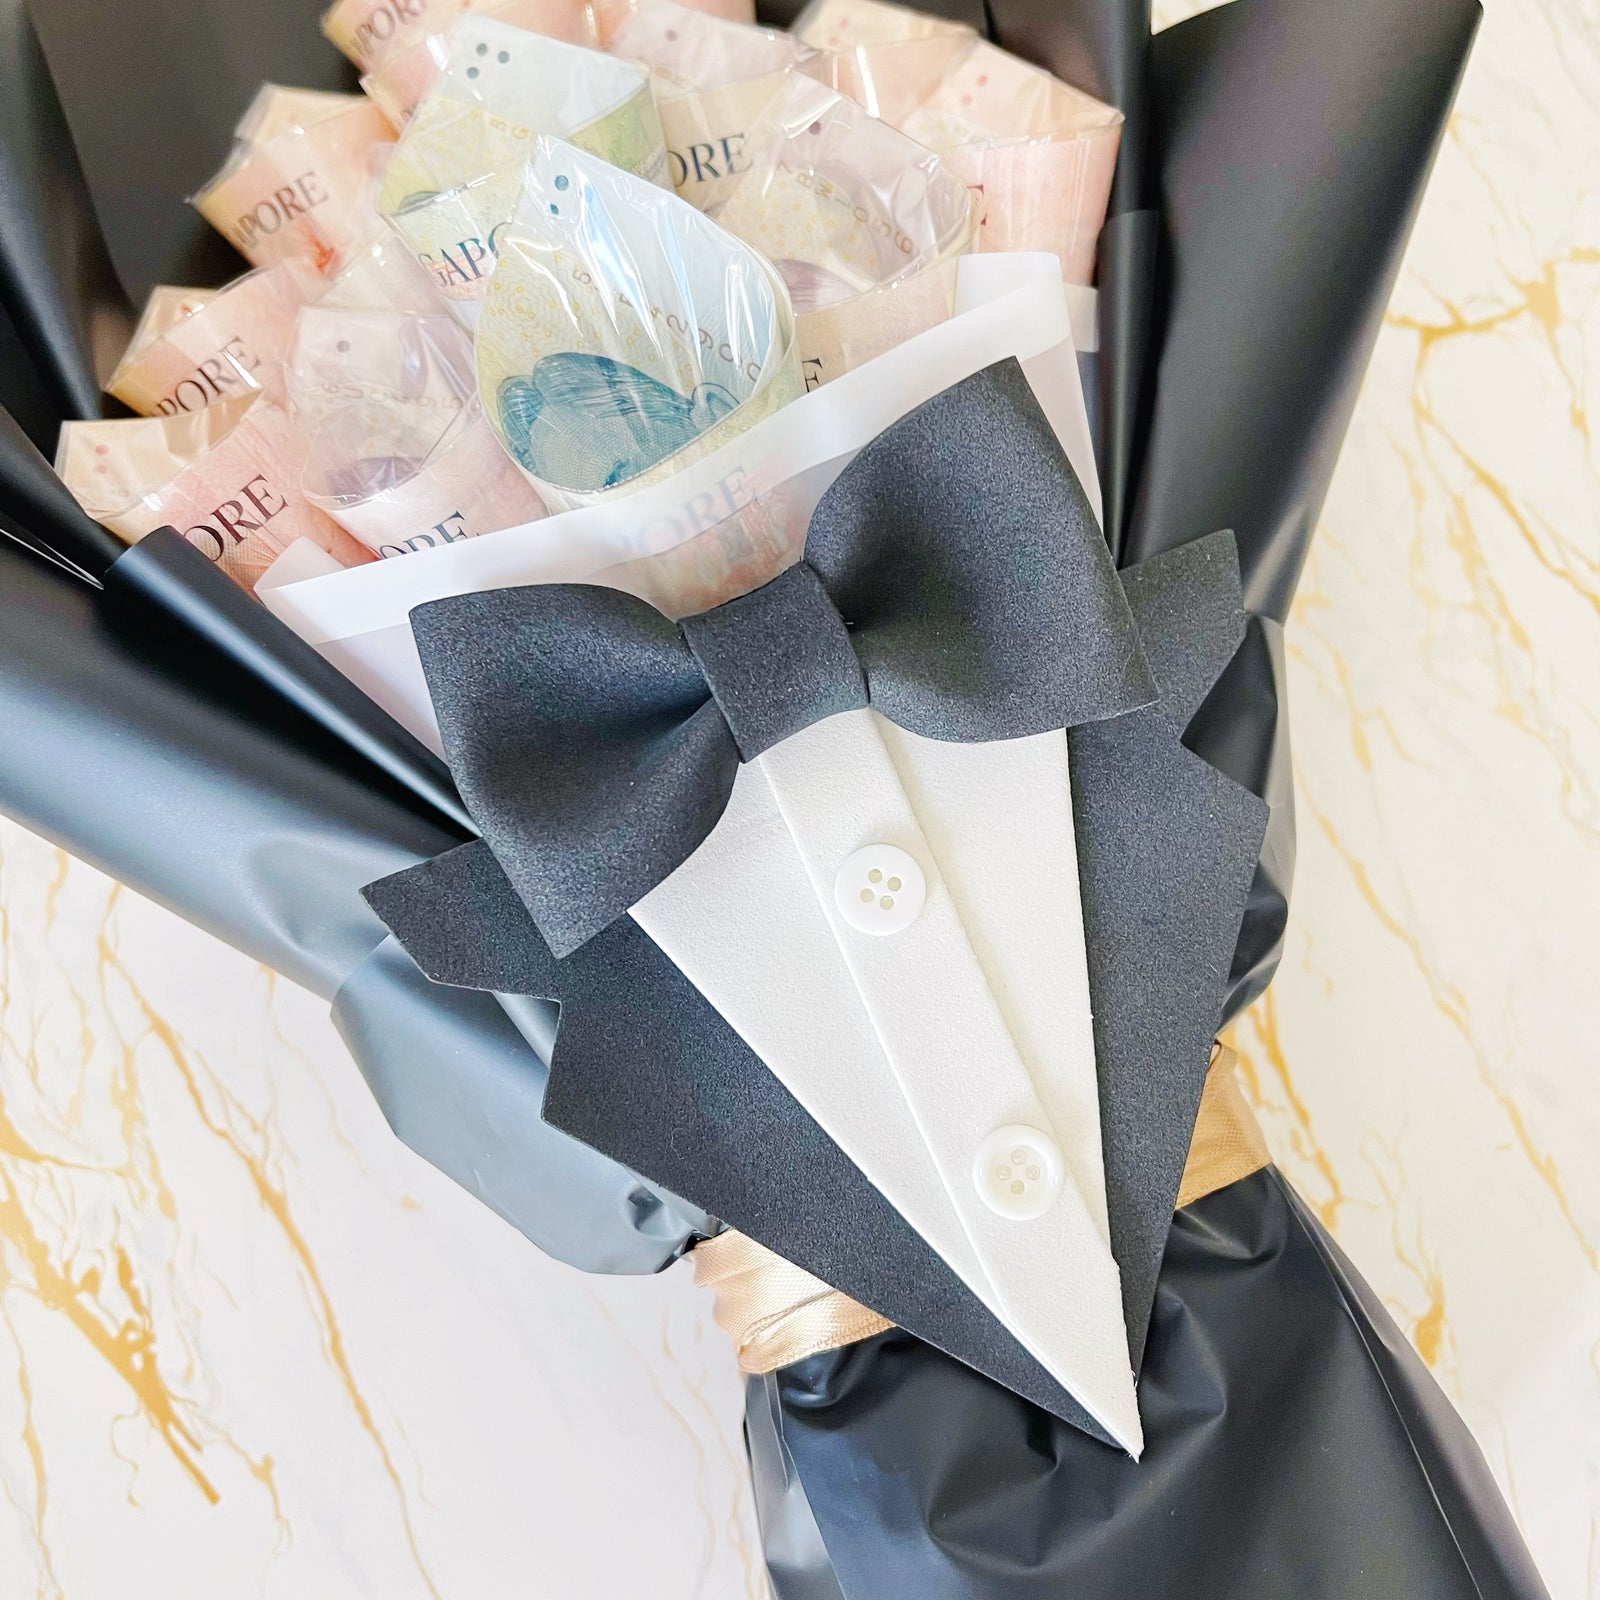 Gentleman Money Bouquet for Him (Custom Amount, Cash Notes Not inclusive) | Gift for Him Ideas (1 day pre-order) - Rainbowly Fresh Fruit Gift and Flower Arrangments